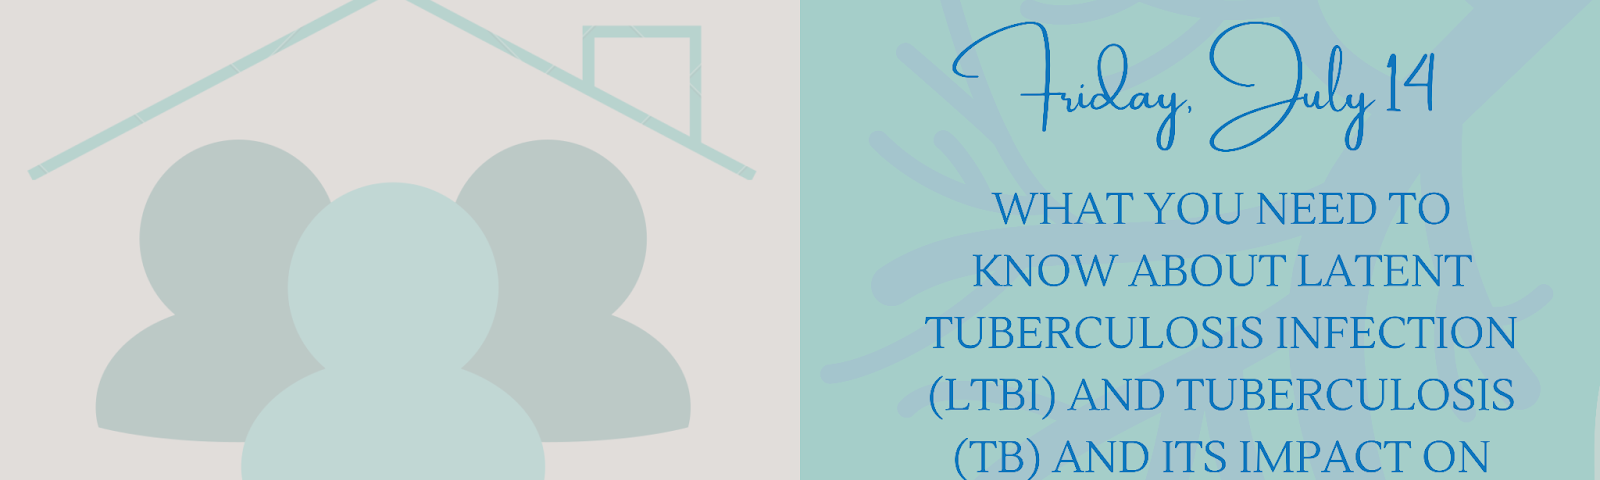 Title image for the “What You Need to Know about Latent Tuberculosis Infection (LTBI) and Tuberculosis (TB) and its Impact on A/AA and NH/PI Communities: A Note from the Tuberculosis Elimination Alliance” blog post